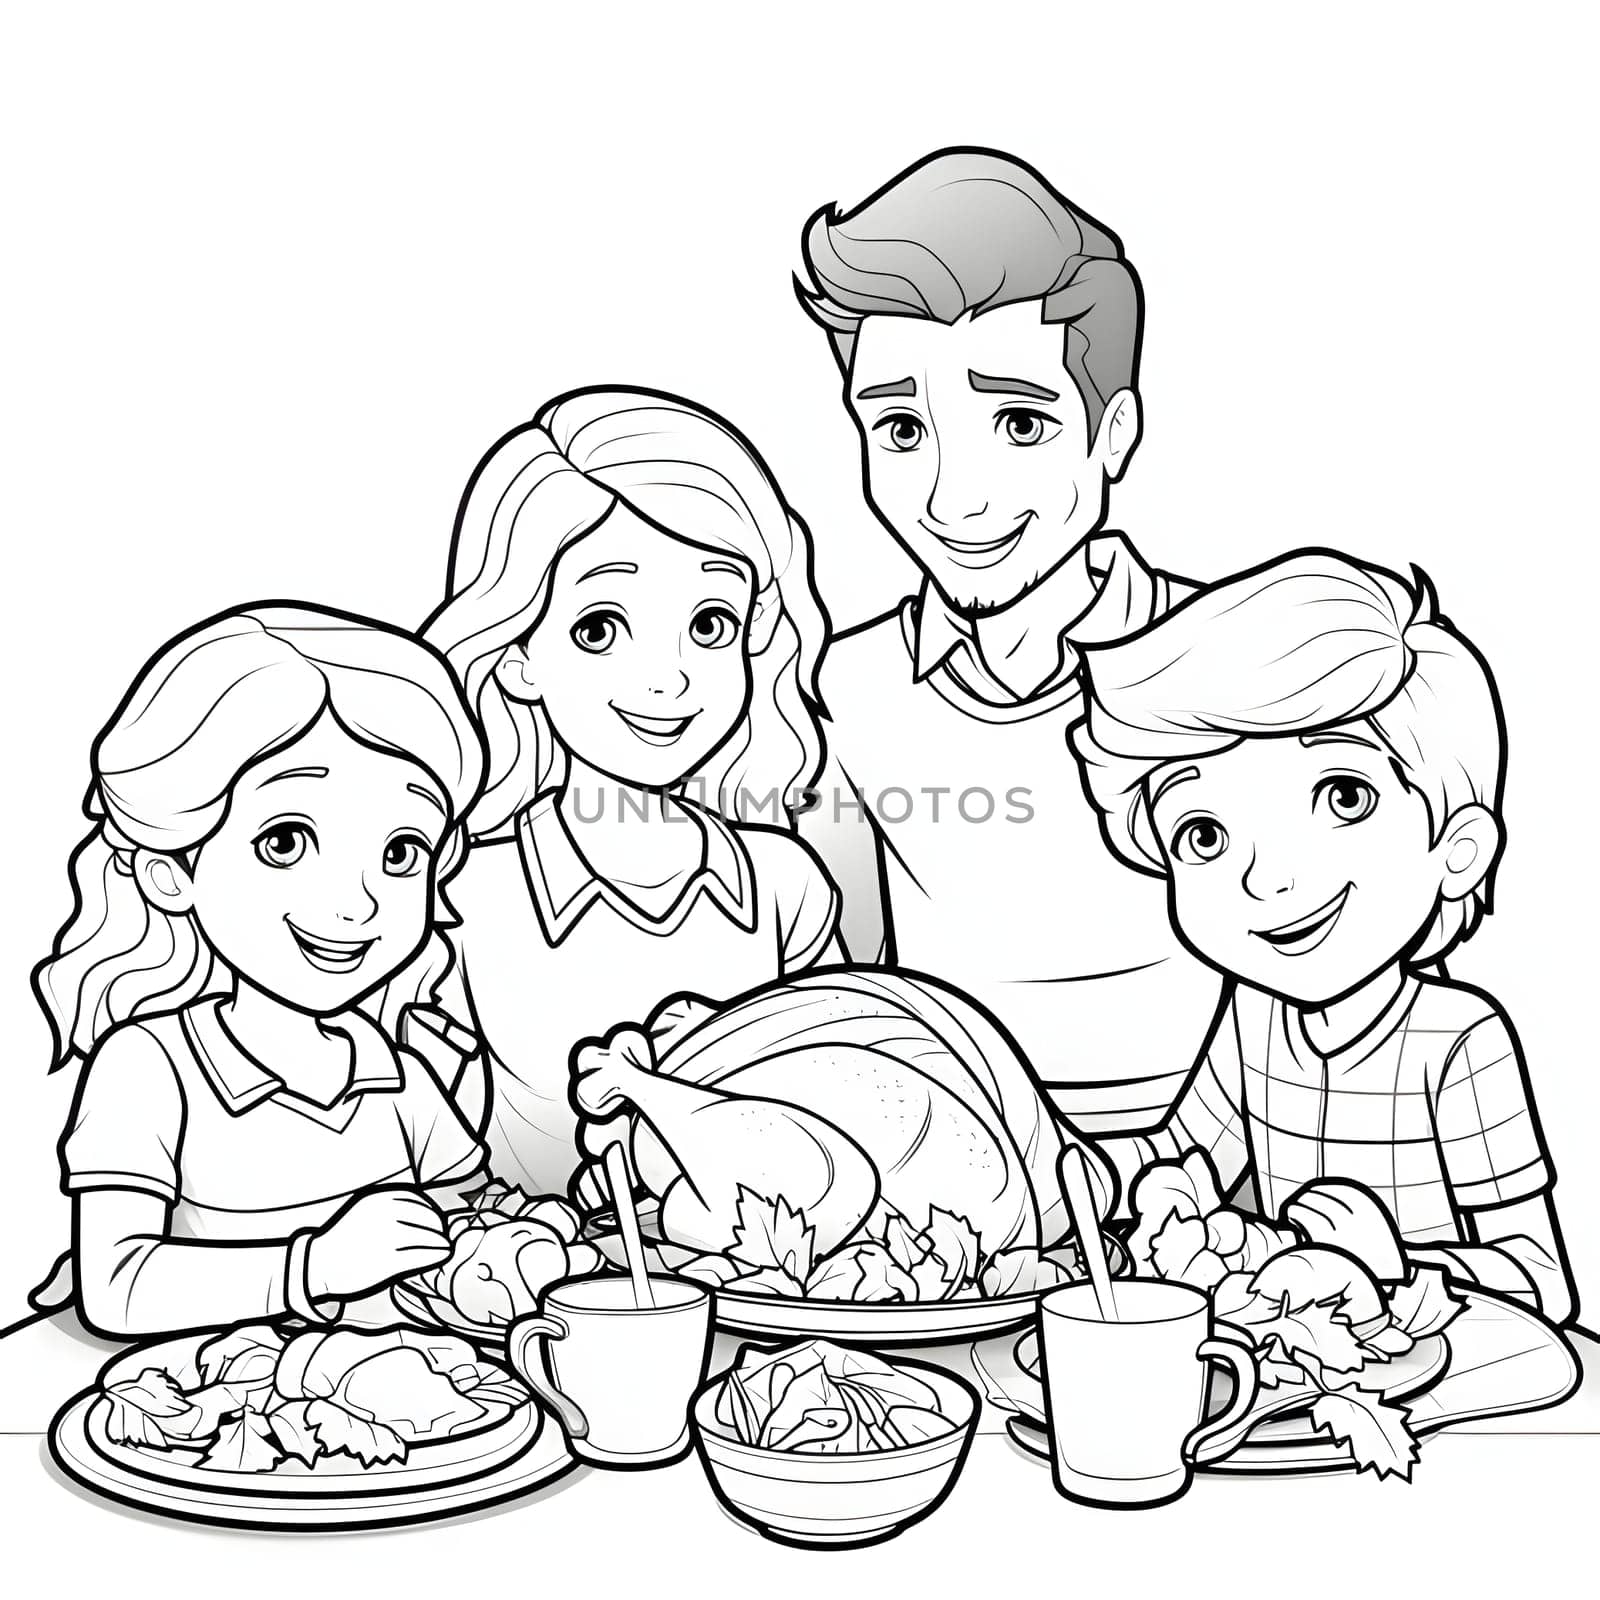 Black and White coloring book happy family at Thanksgiving feast with roast turkey. Turkey as the main dish of thanksgiving for the harvest. An atmosphere of joy and celebration.